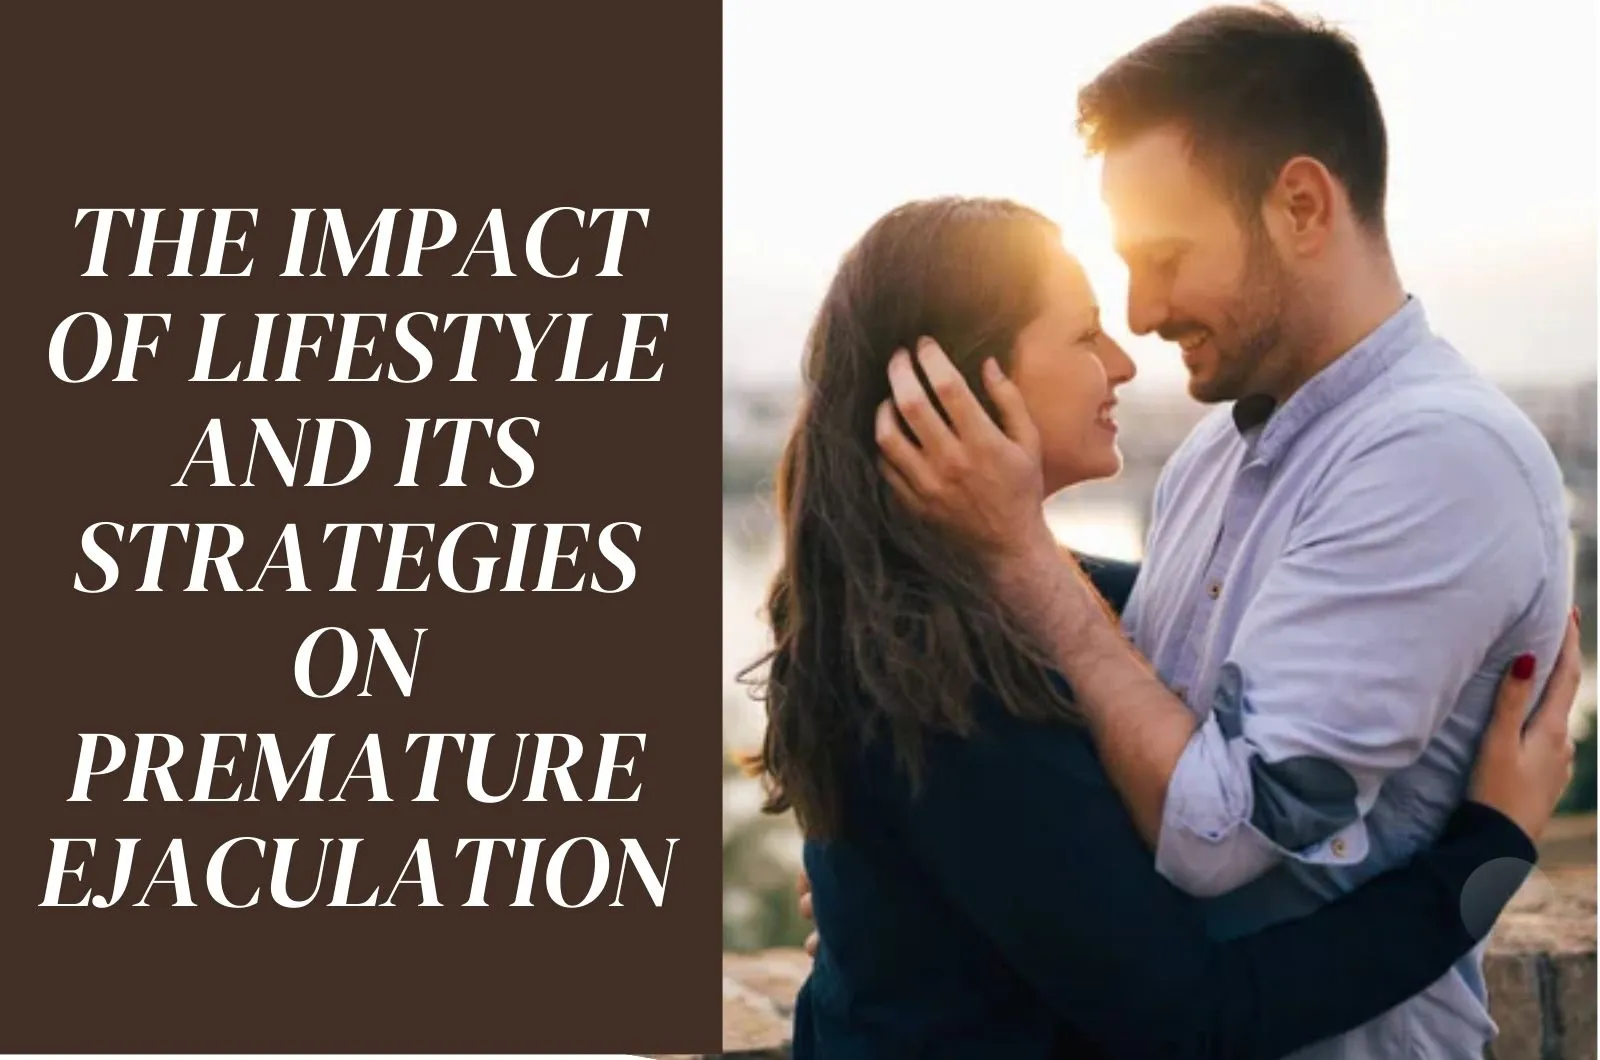 Premature Ejaculation Impact of Lifestyle & its Strategies